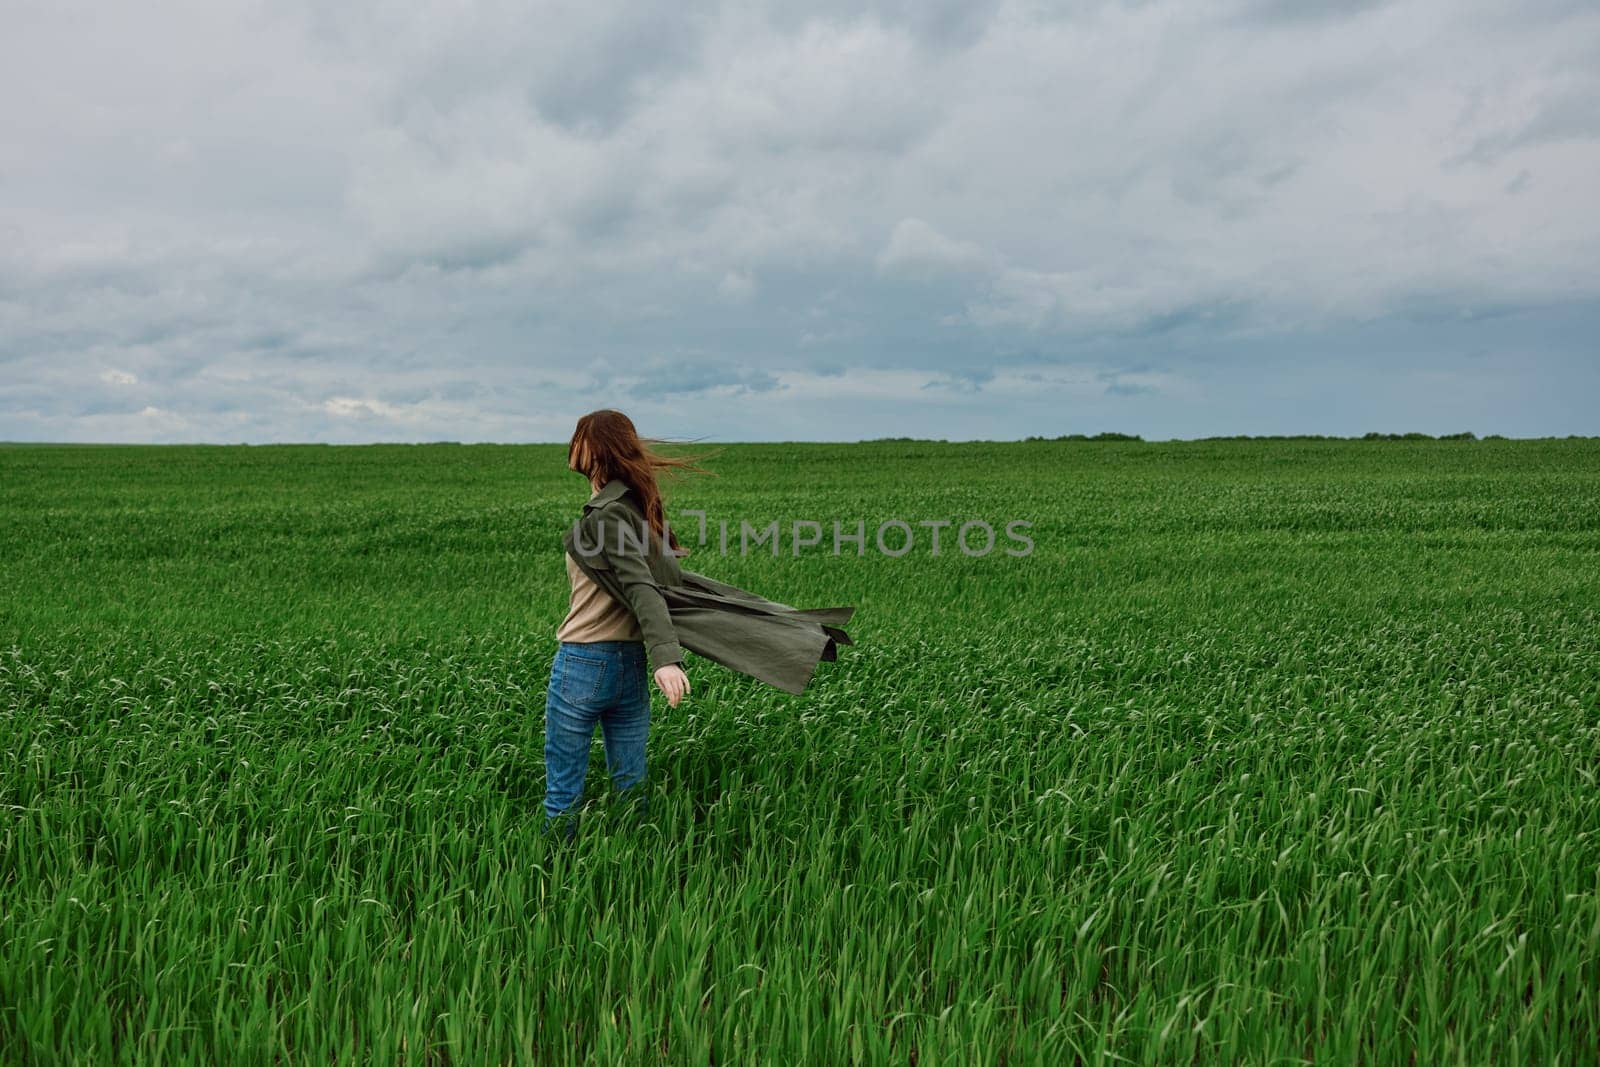 a woman in a dark coat walks through a field with tall grass in windy, rainy weather. High quality photo